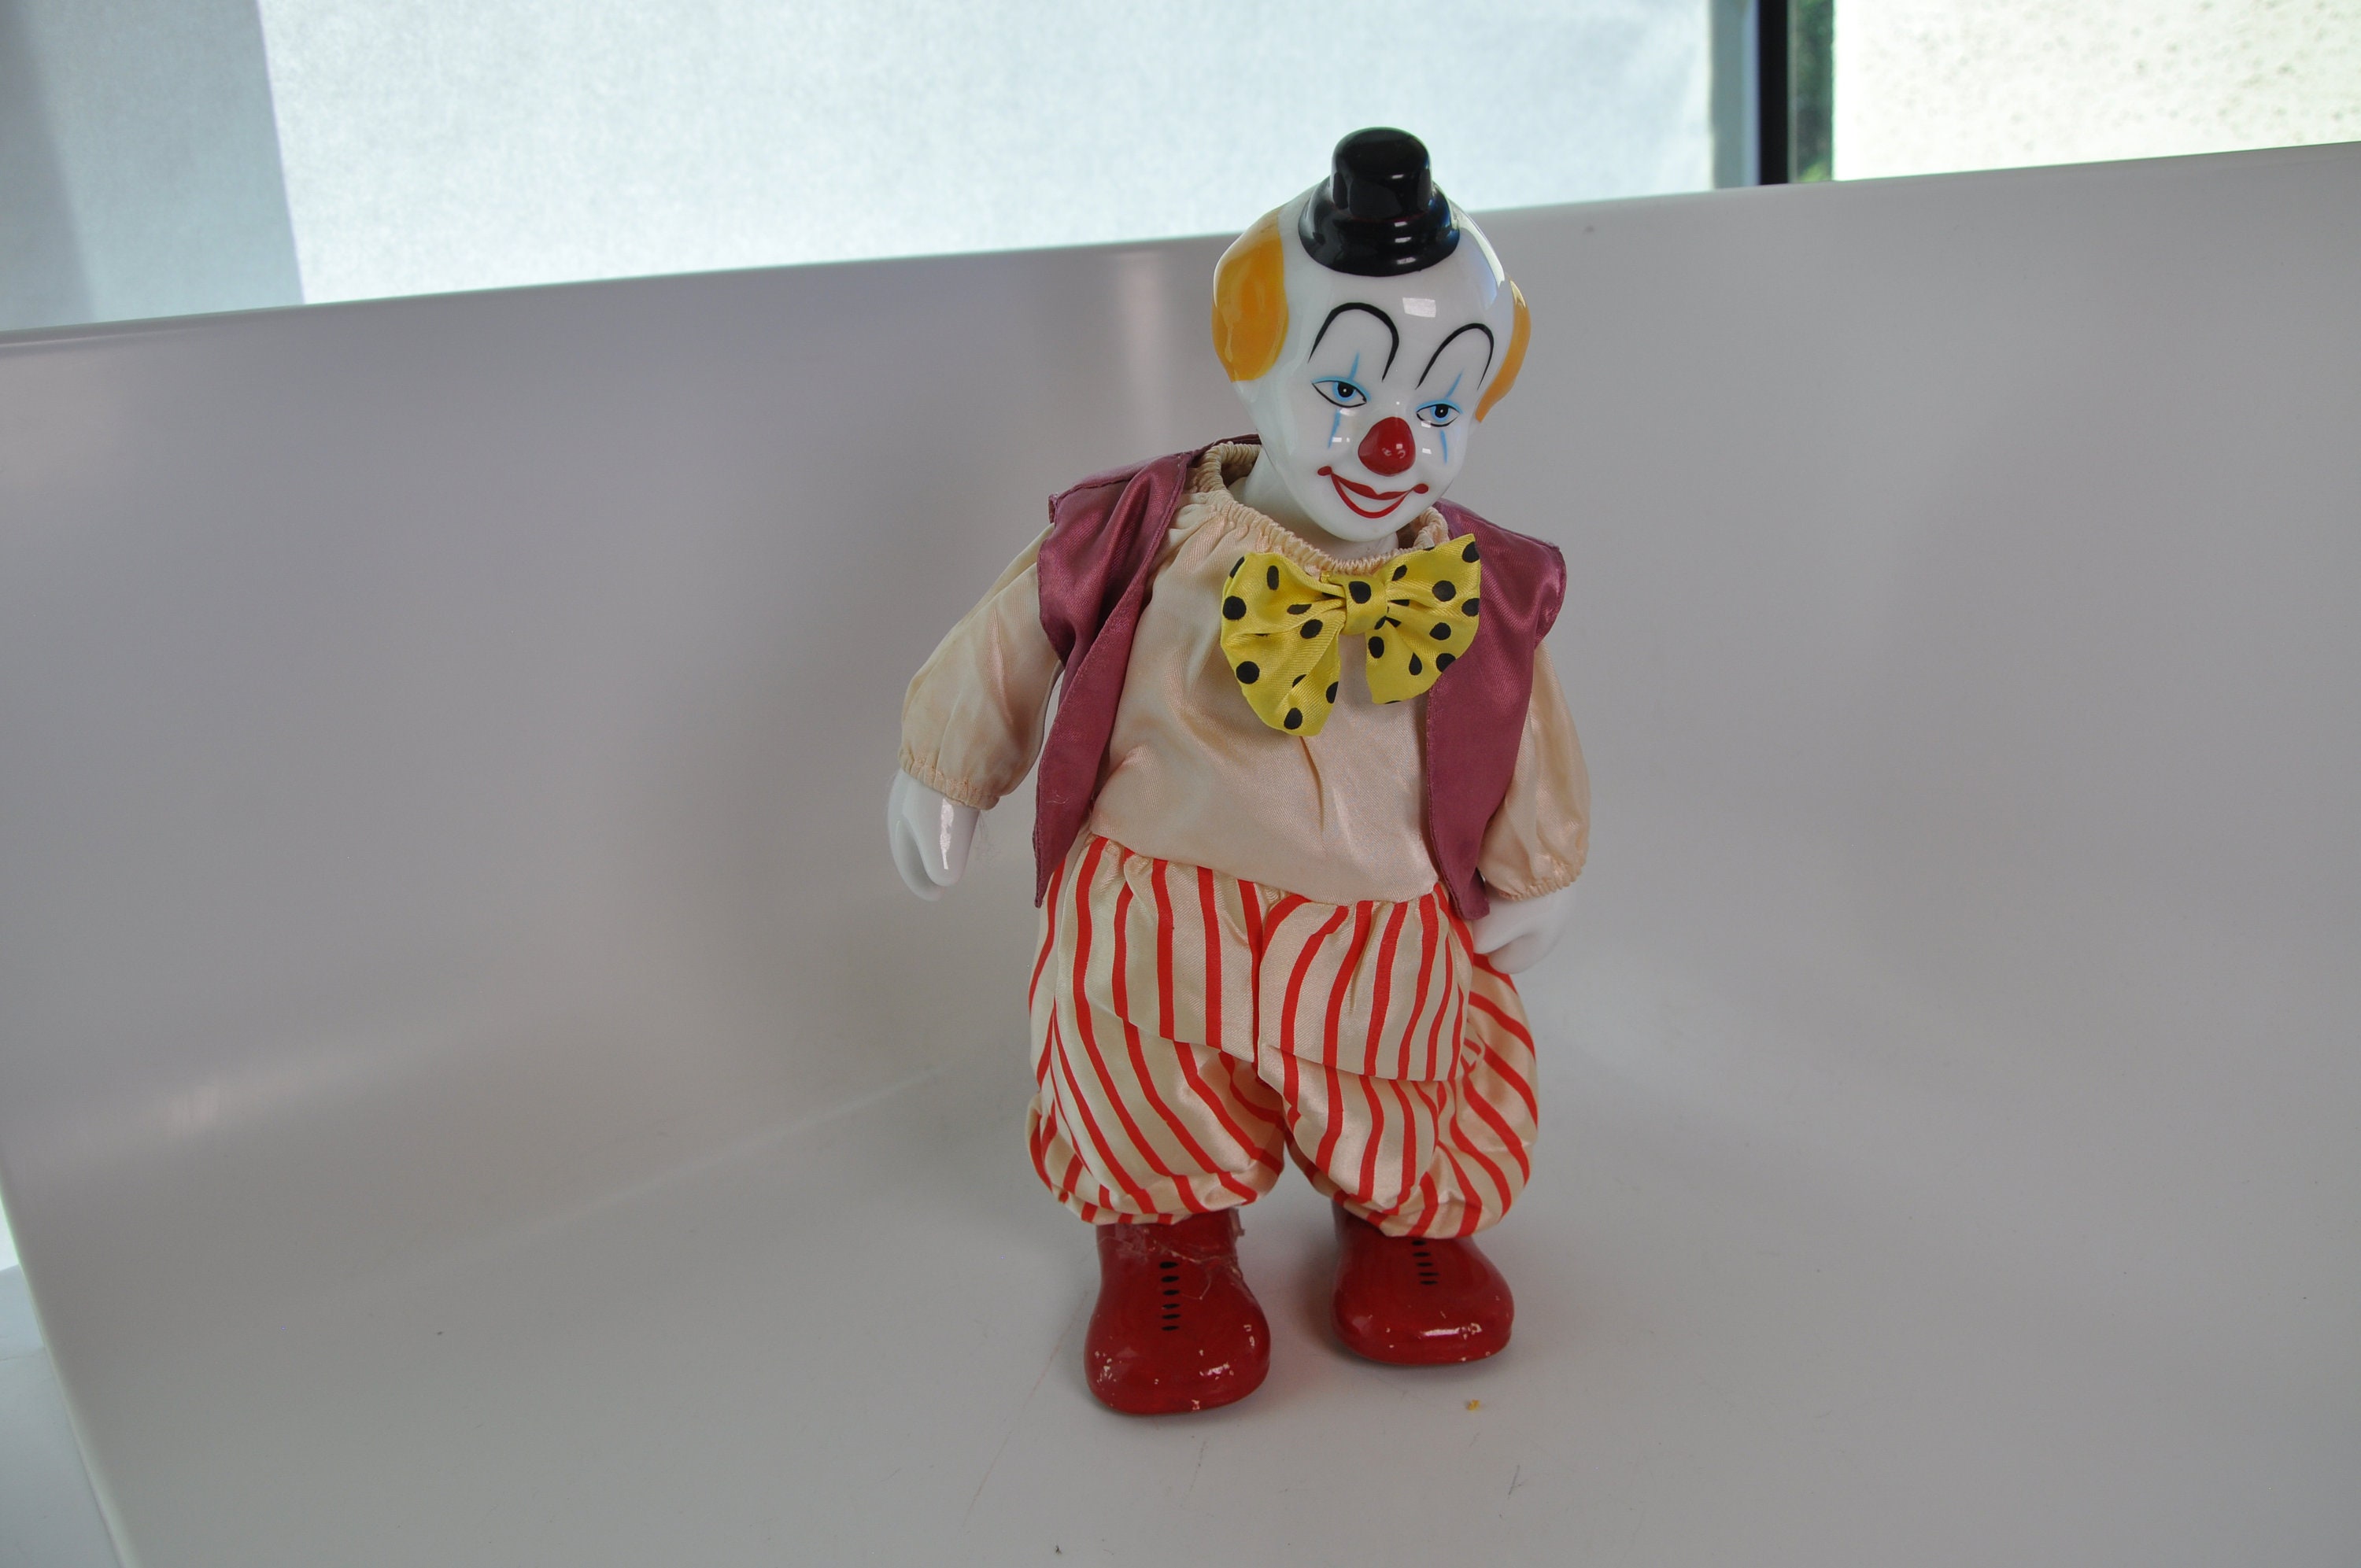 Toddmomy Circus Clown Figurines 5Pcs Miniature Clown Figurines Carnival  Cake Topper Clown Ornaments for Home Office Landscape